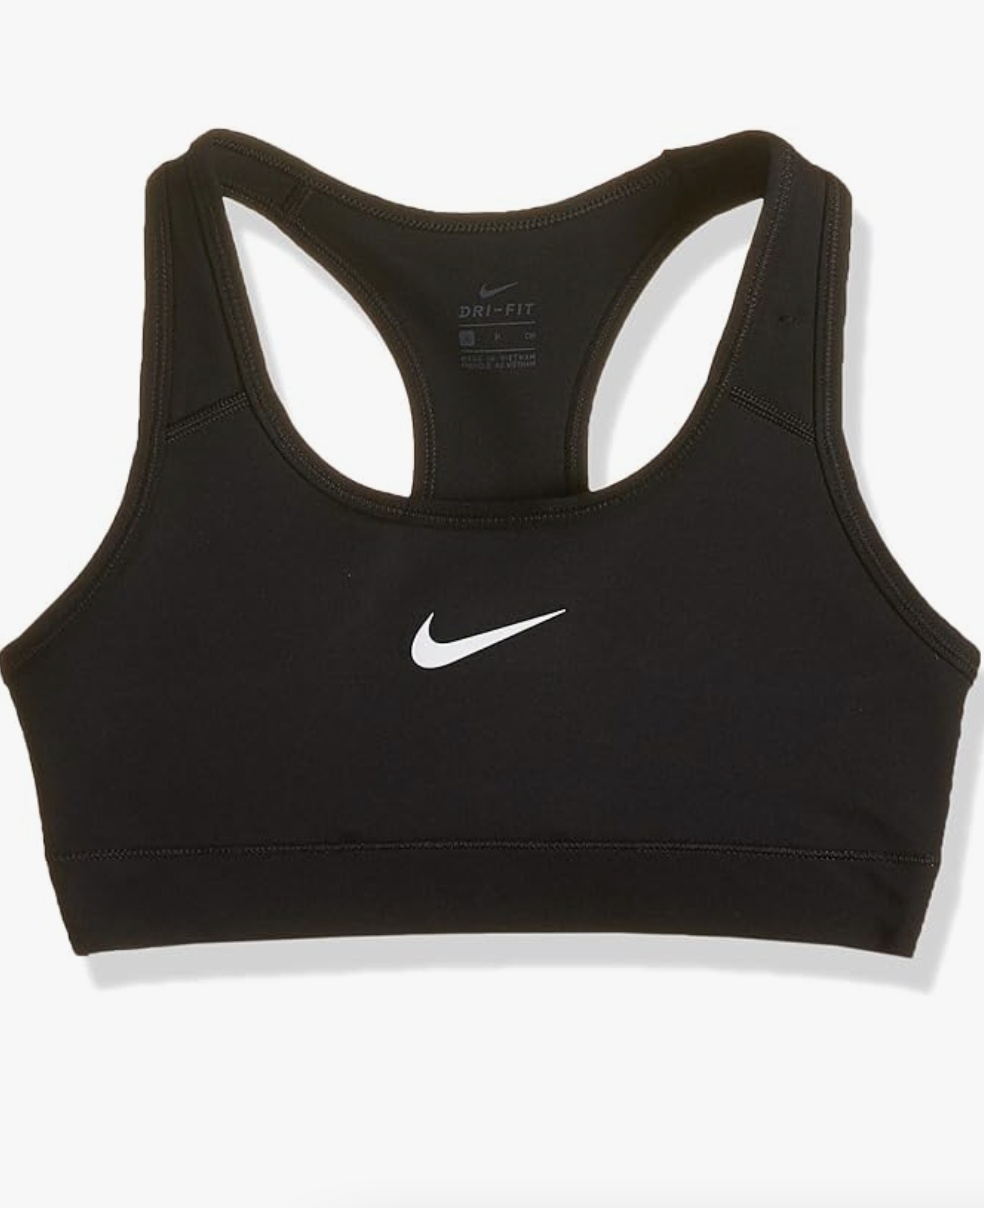 Trainers Recommend These Compression Bras To Keep Your Boobs From Bouncing